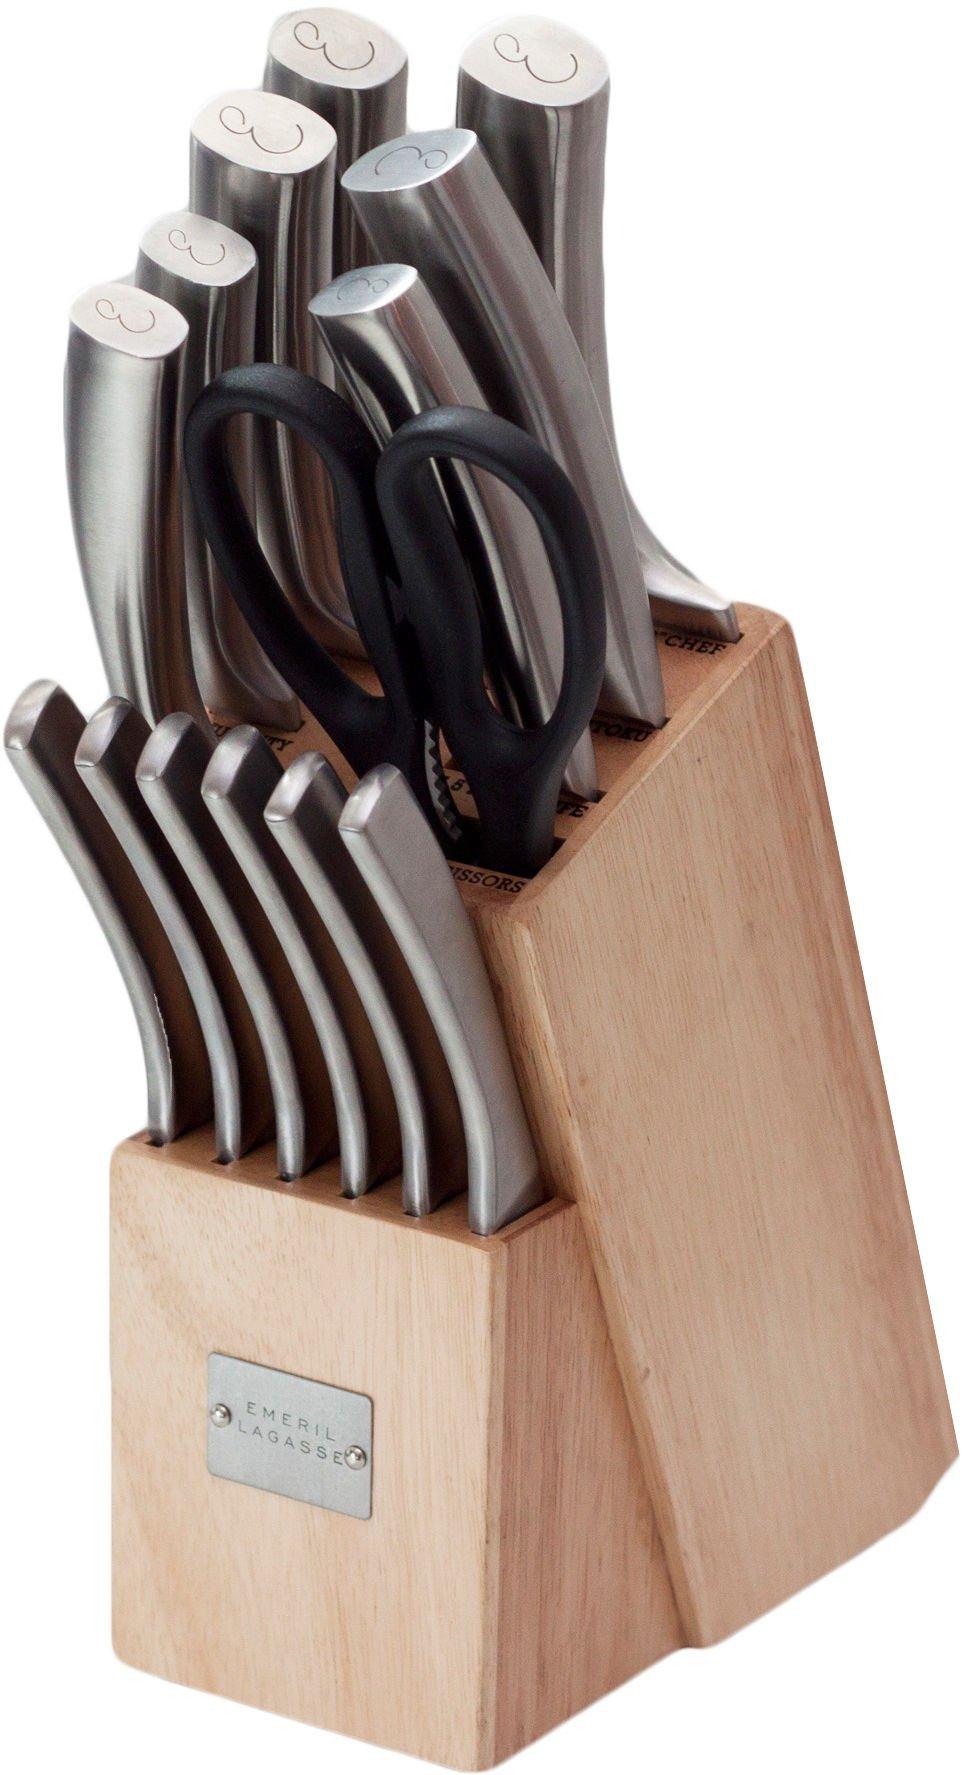 Emeril Stamped Knife Set in Wood Box // 5 Piece - Emeril Knives